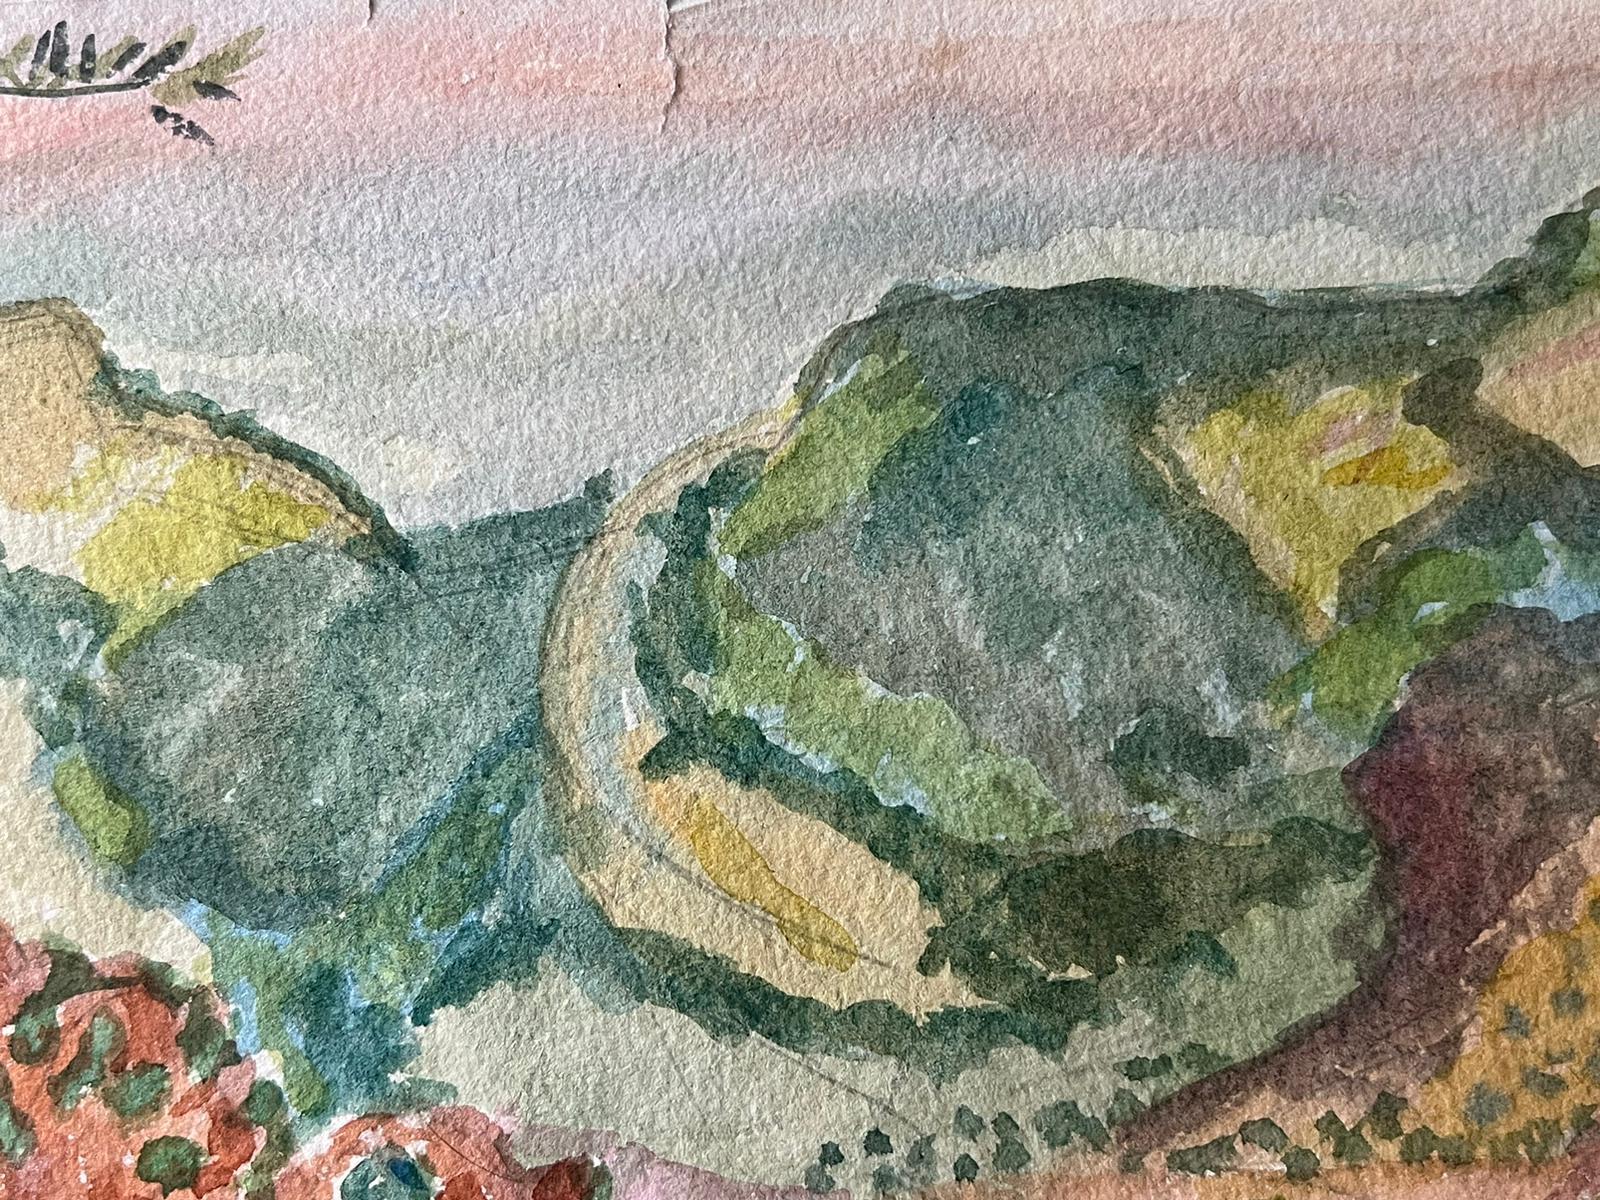 Provencal Landscape
by Louis Bellon (French 1908-1998)
Signed and dated 1947
From a batch of similar work where most were dated 1942-1947
watercolour painting on paper, unframed

measurements: 10 x 14 inches

provenance: private collection of the